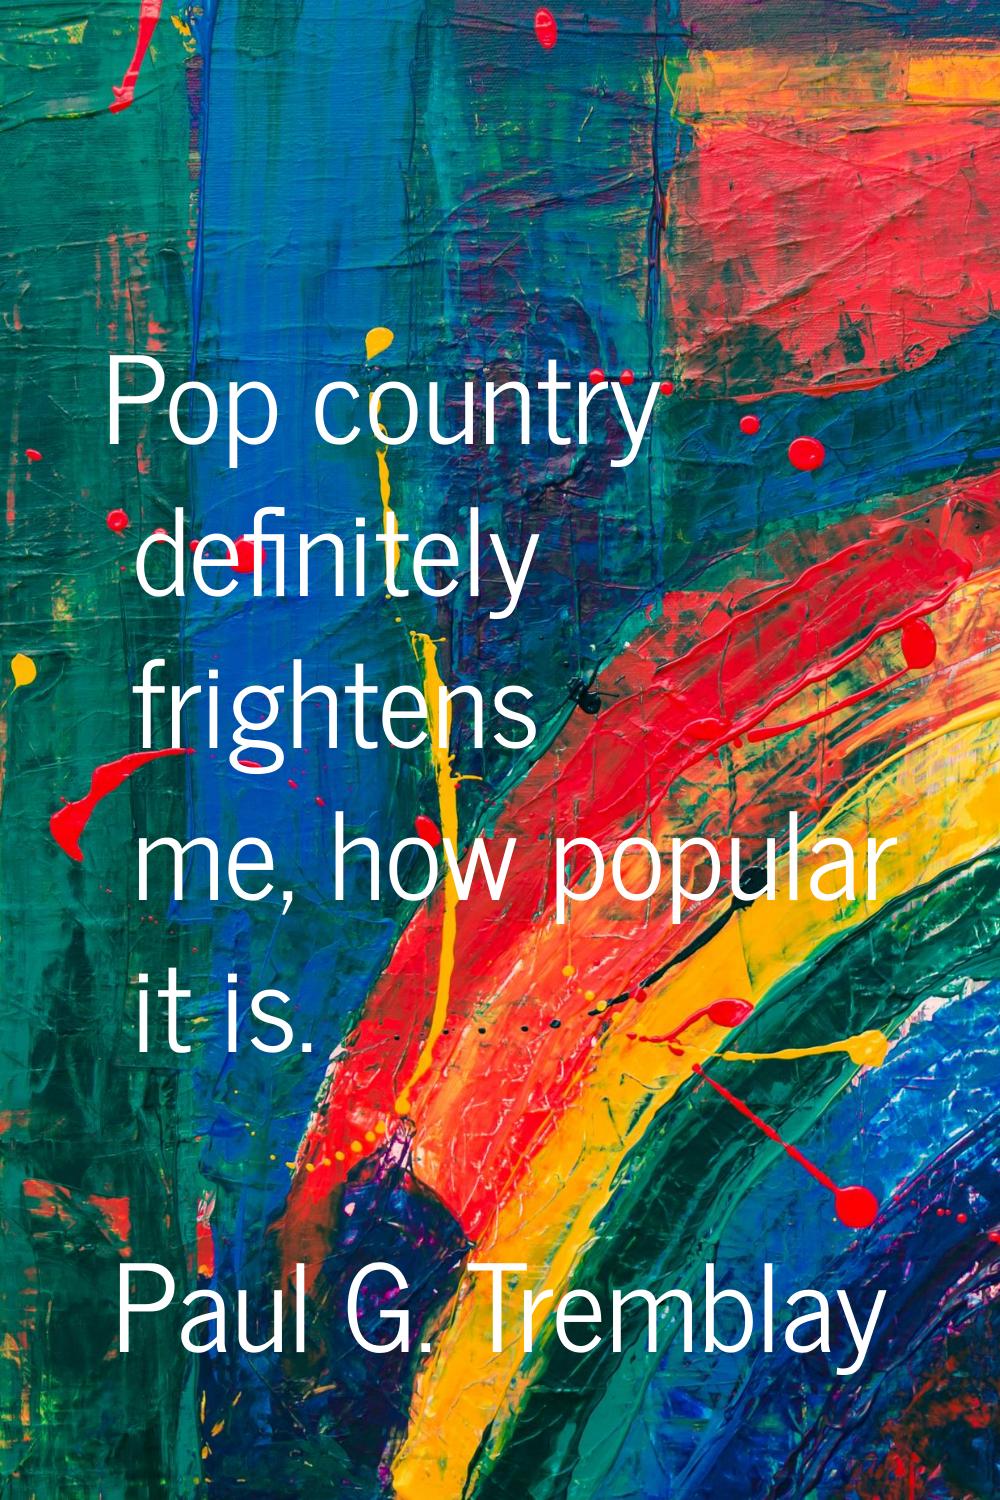 Pop country definitely frightens me, how popular it is.